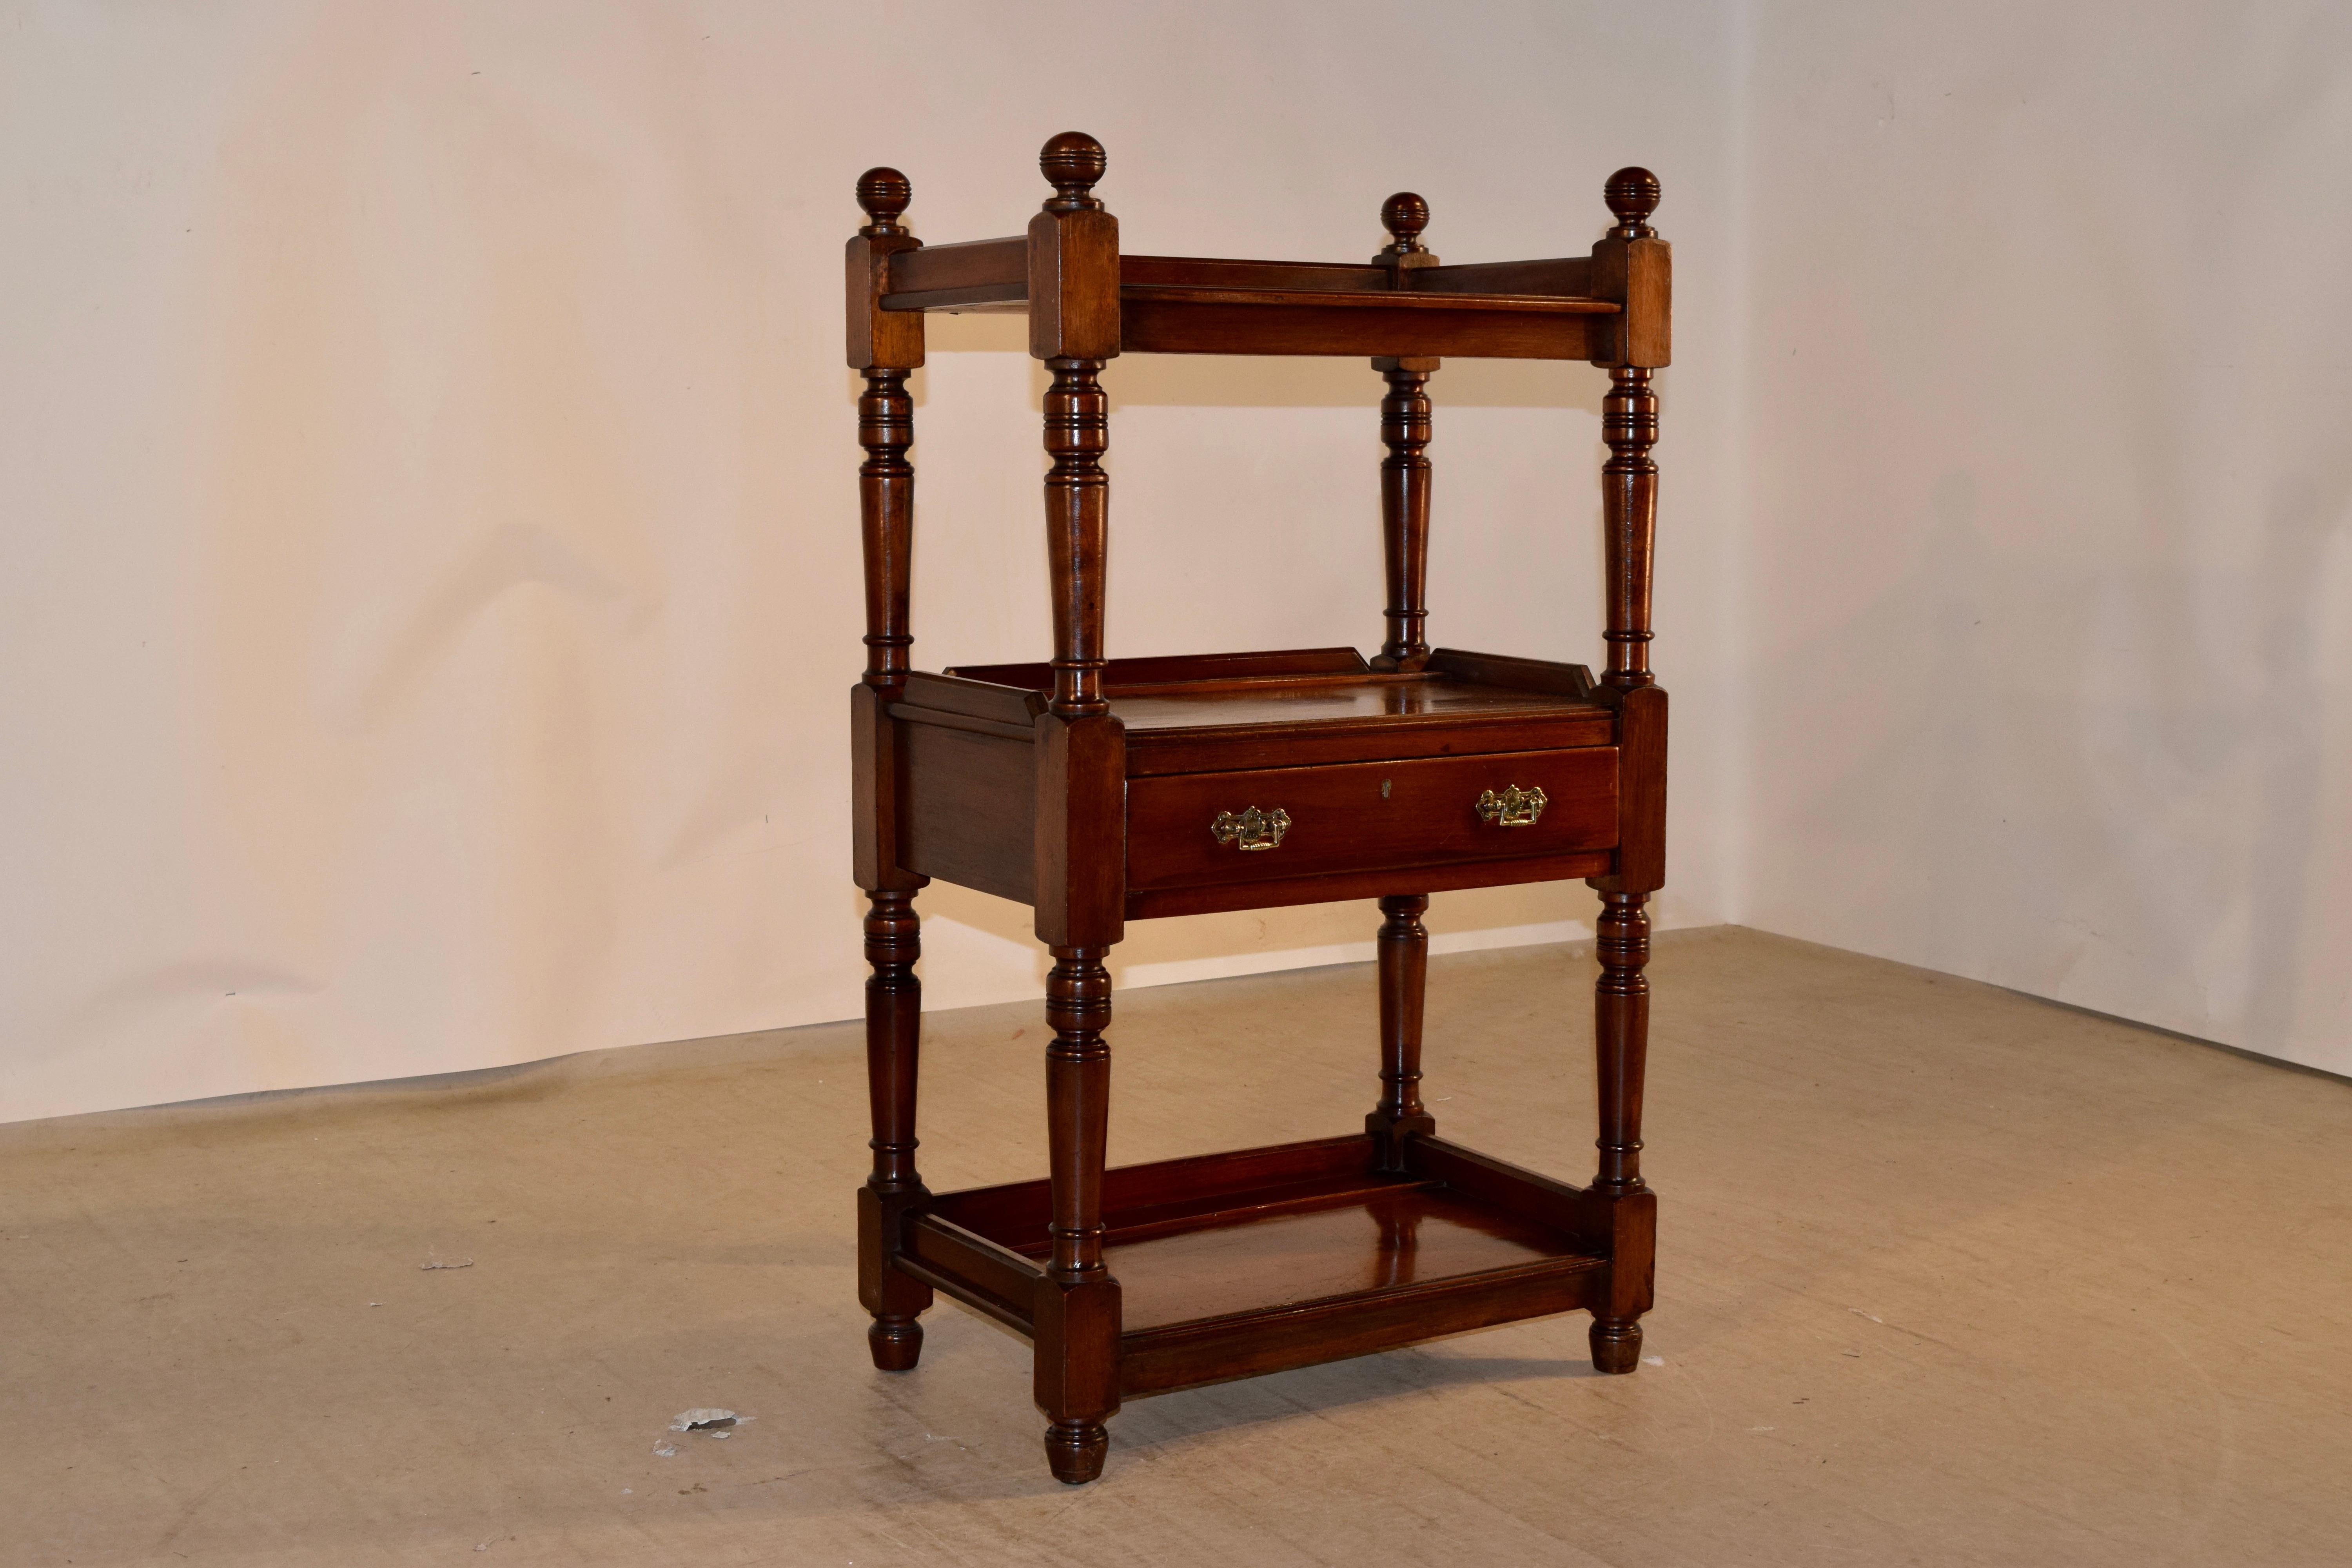 19th century mahogany shelf from England with hand turned finials, following down to three shelves, all with plate rails and galleries around the shelves. The middle shelf has a drawer with what appears to be original hardware. The shelves have hand